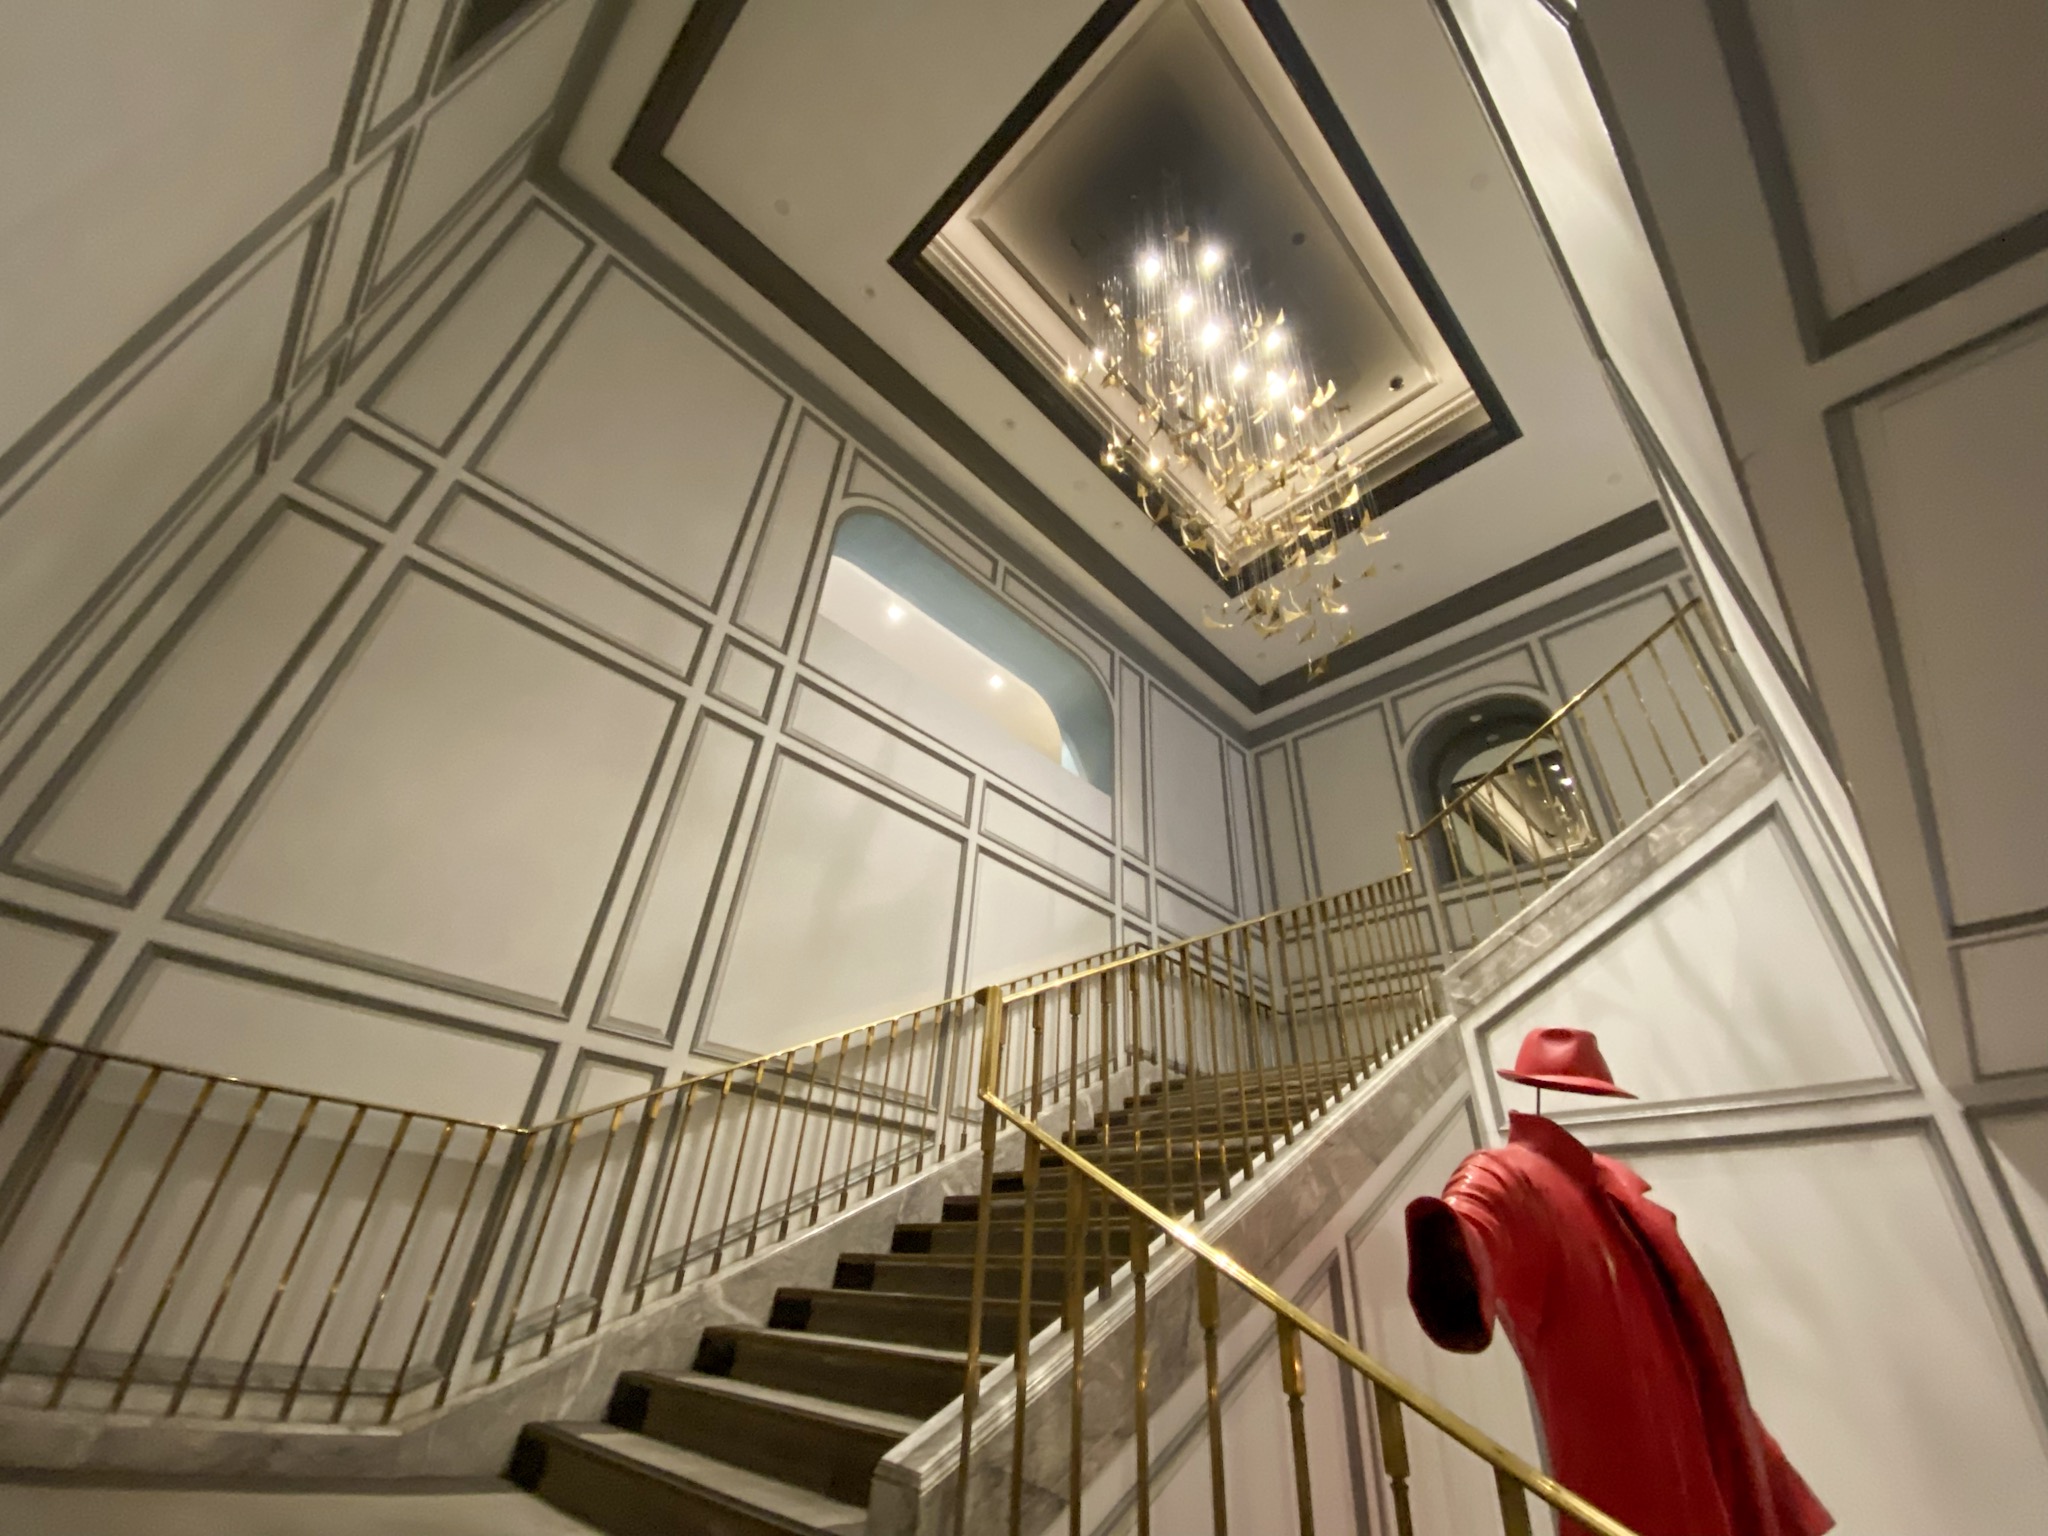 a staircase with a red coat and a chandelier